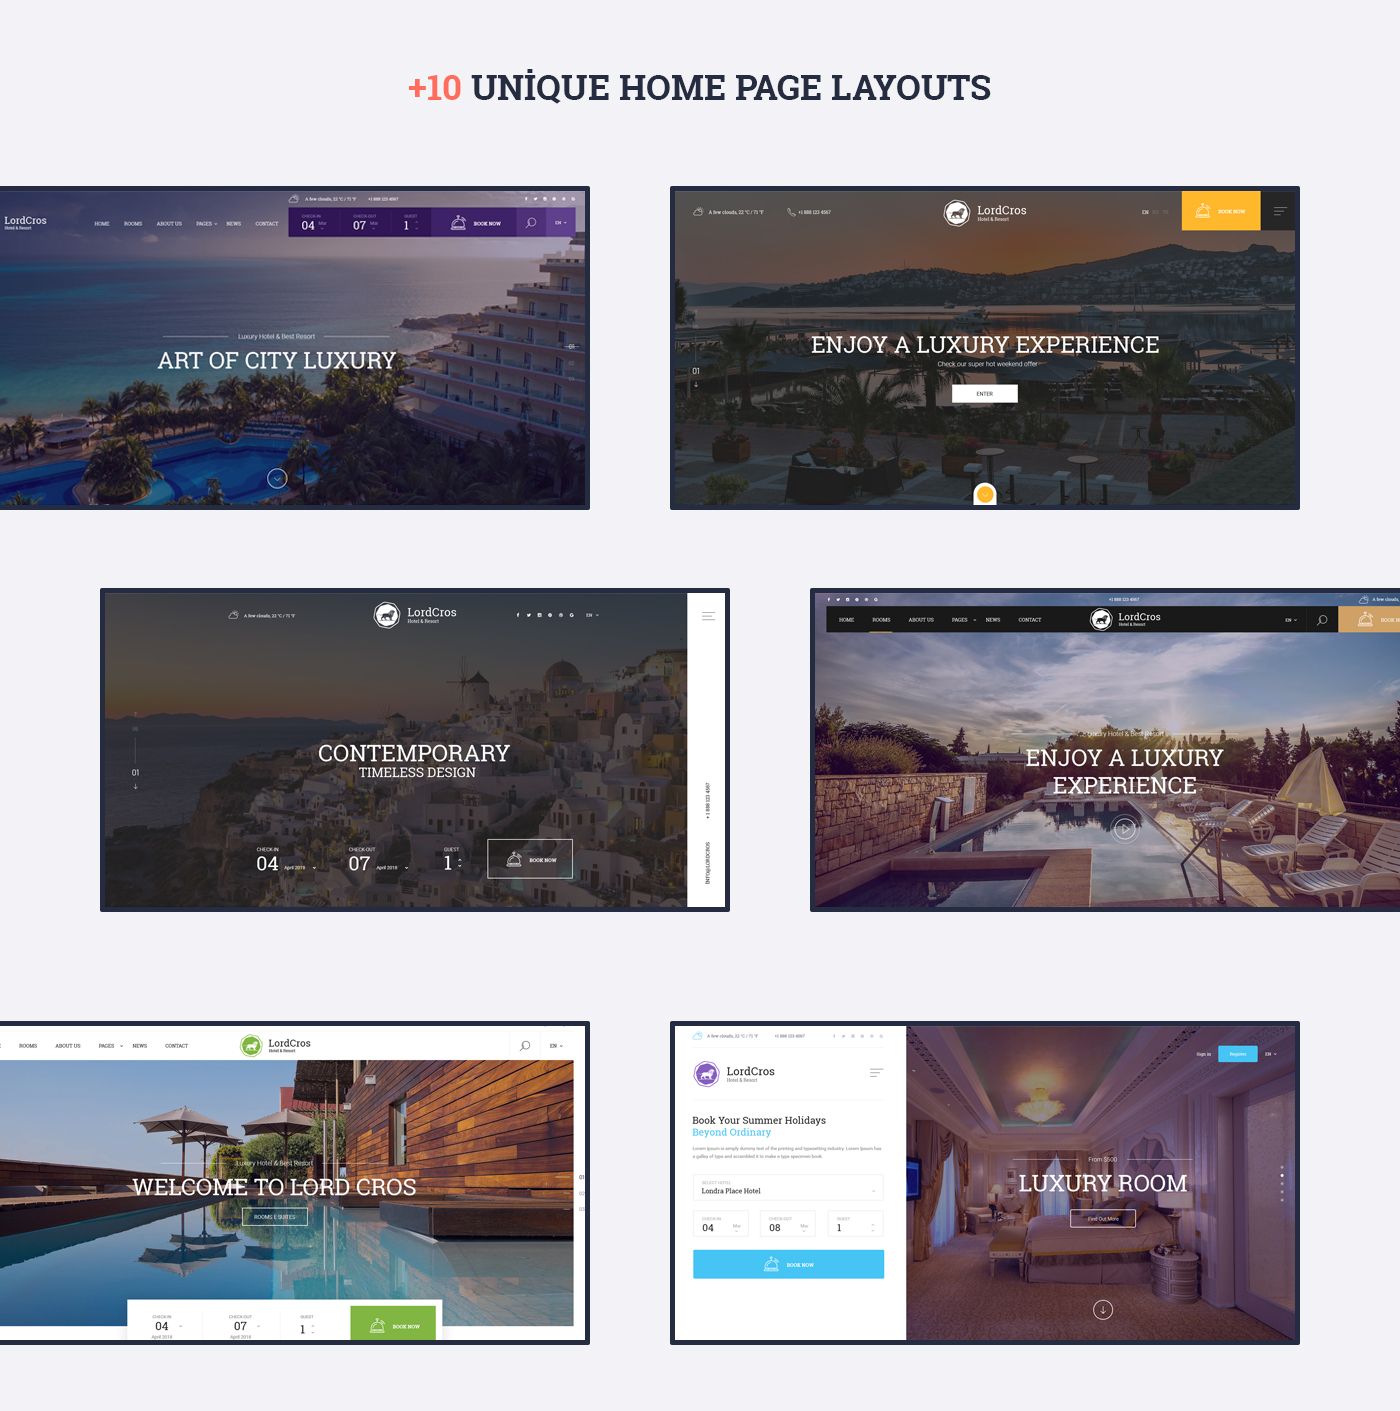 LordCros - Hotel, Resort & Spa PSD Template - 3